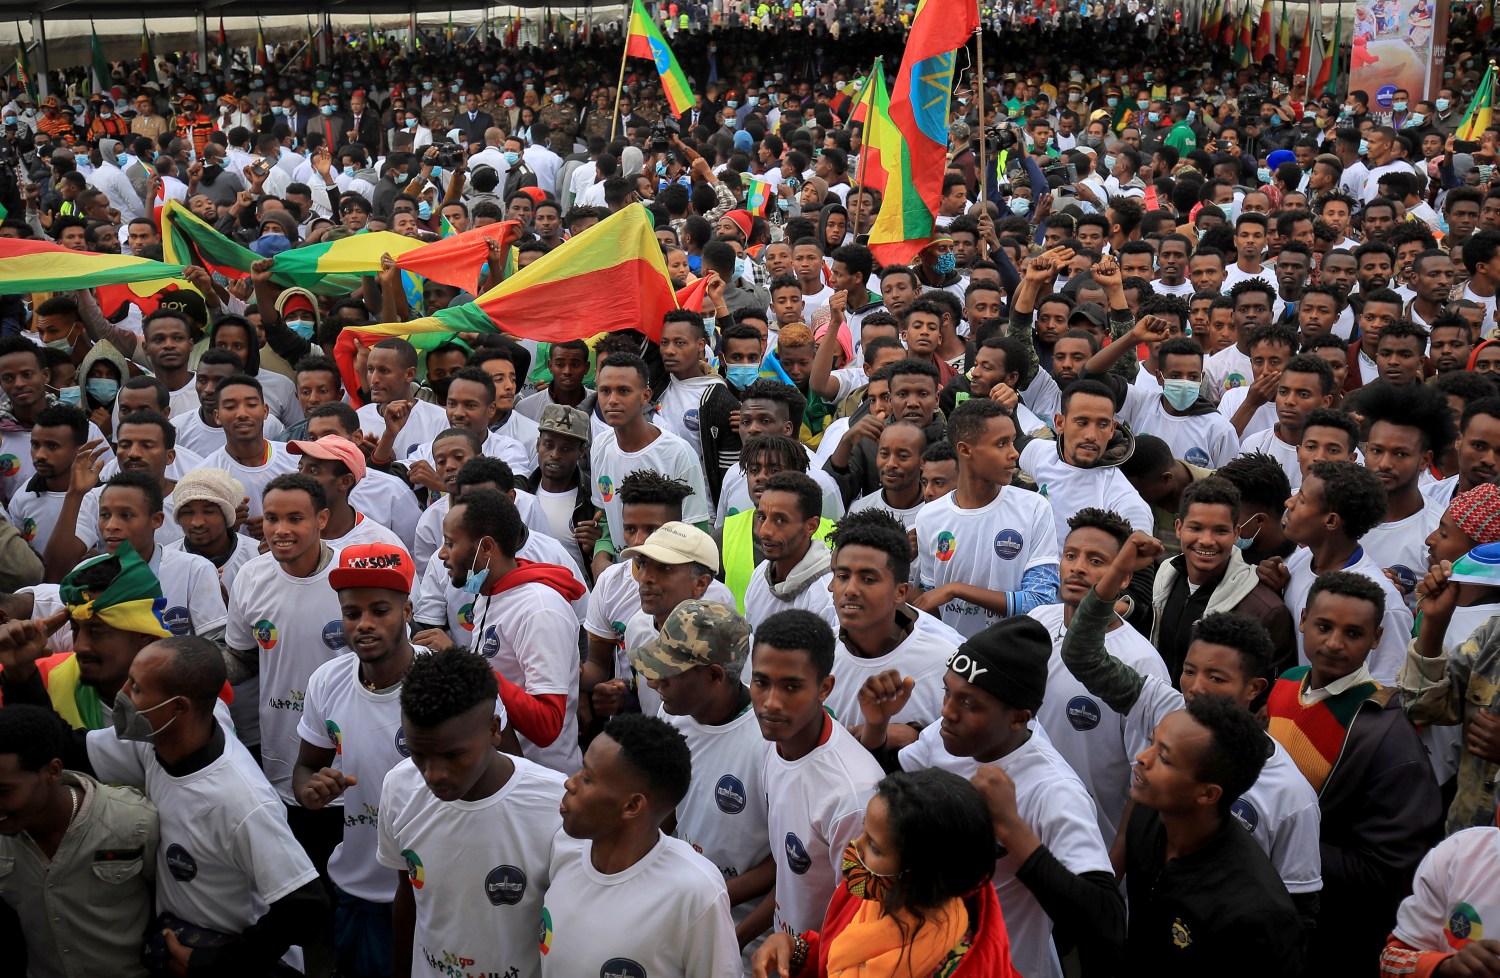 Recruits to join Ethiopia's Defense Force gather during the farewell ceremony at the Meskel Square in Addis Ababa, Ethiopia July 27, 2021. REUTERS/Tiksa Negeri